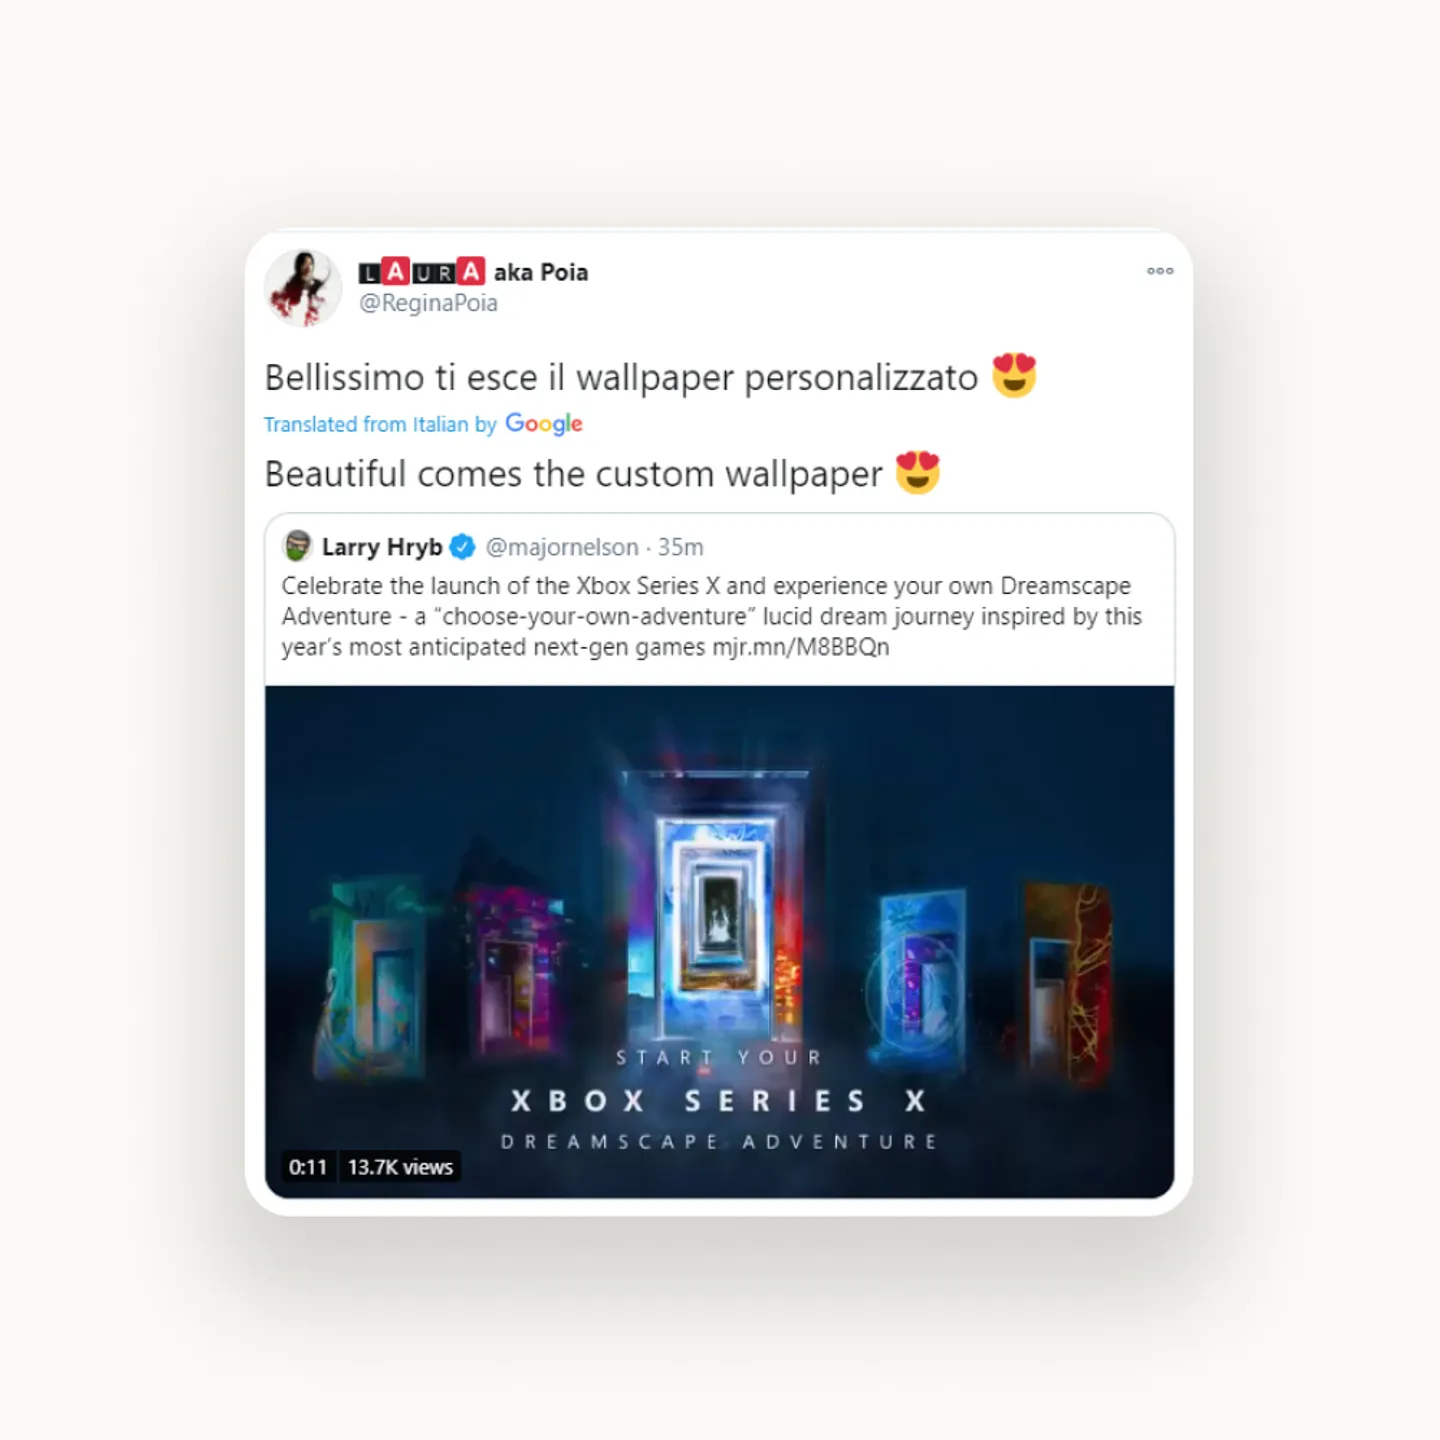 Social post promoting the experience